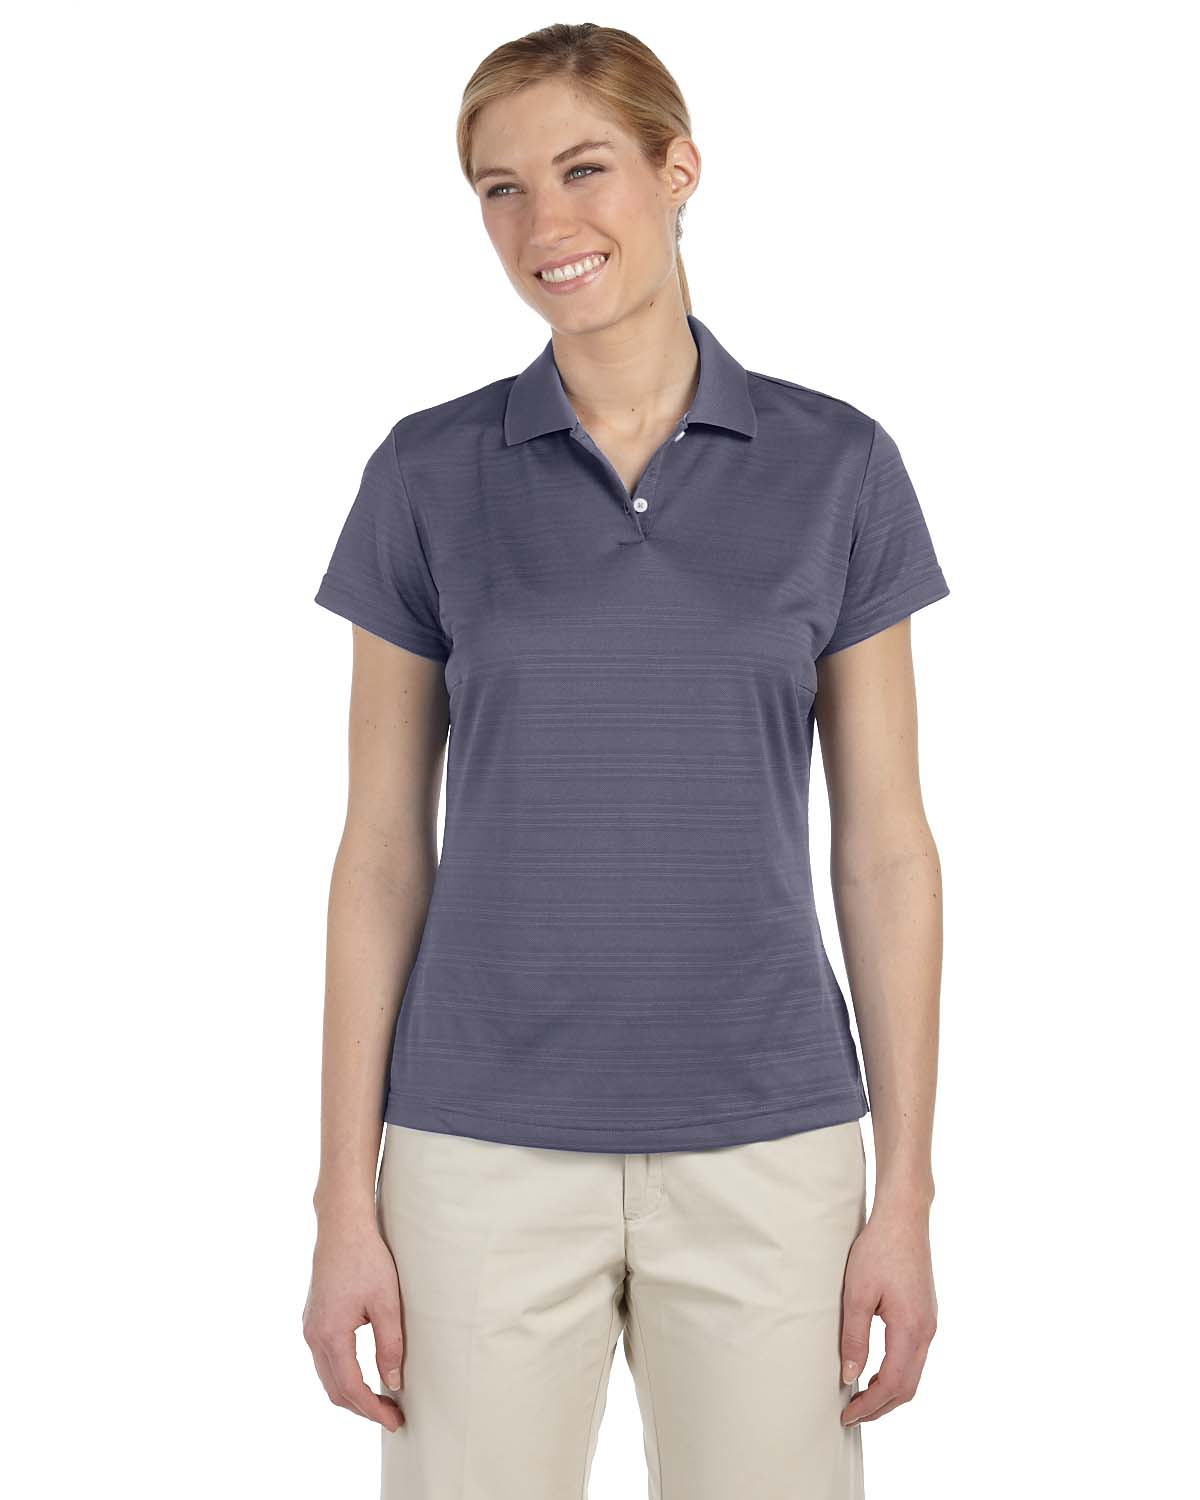 ADIDAS A162 - Ladies' ClimaLite Textured Solid Polo